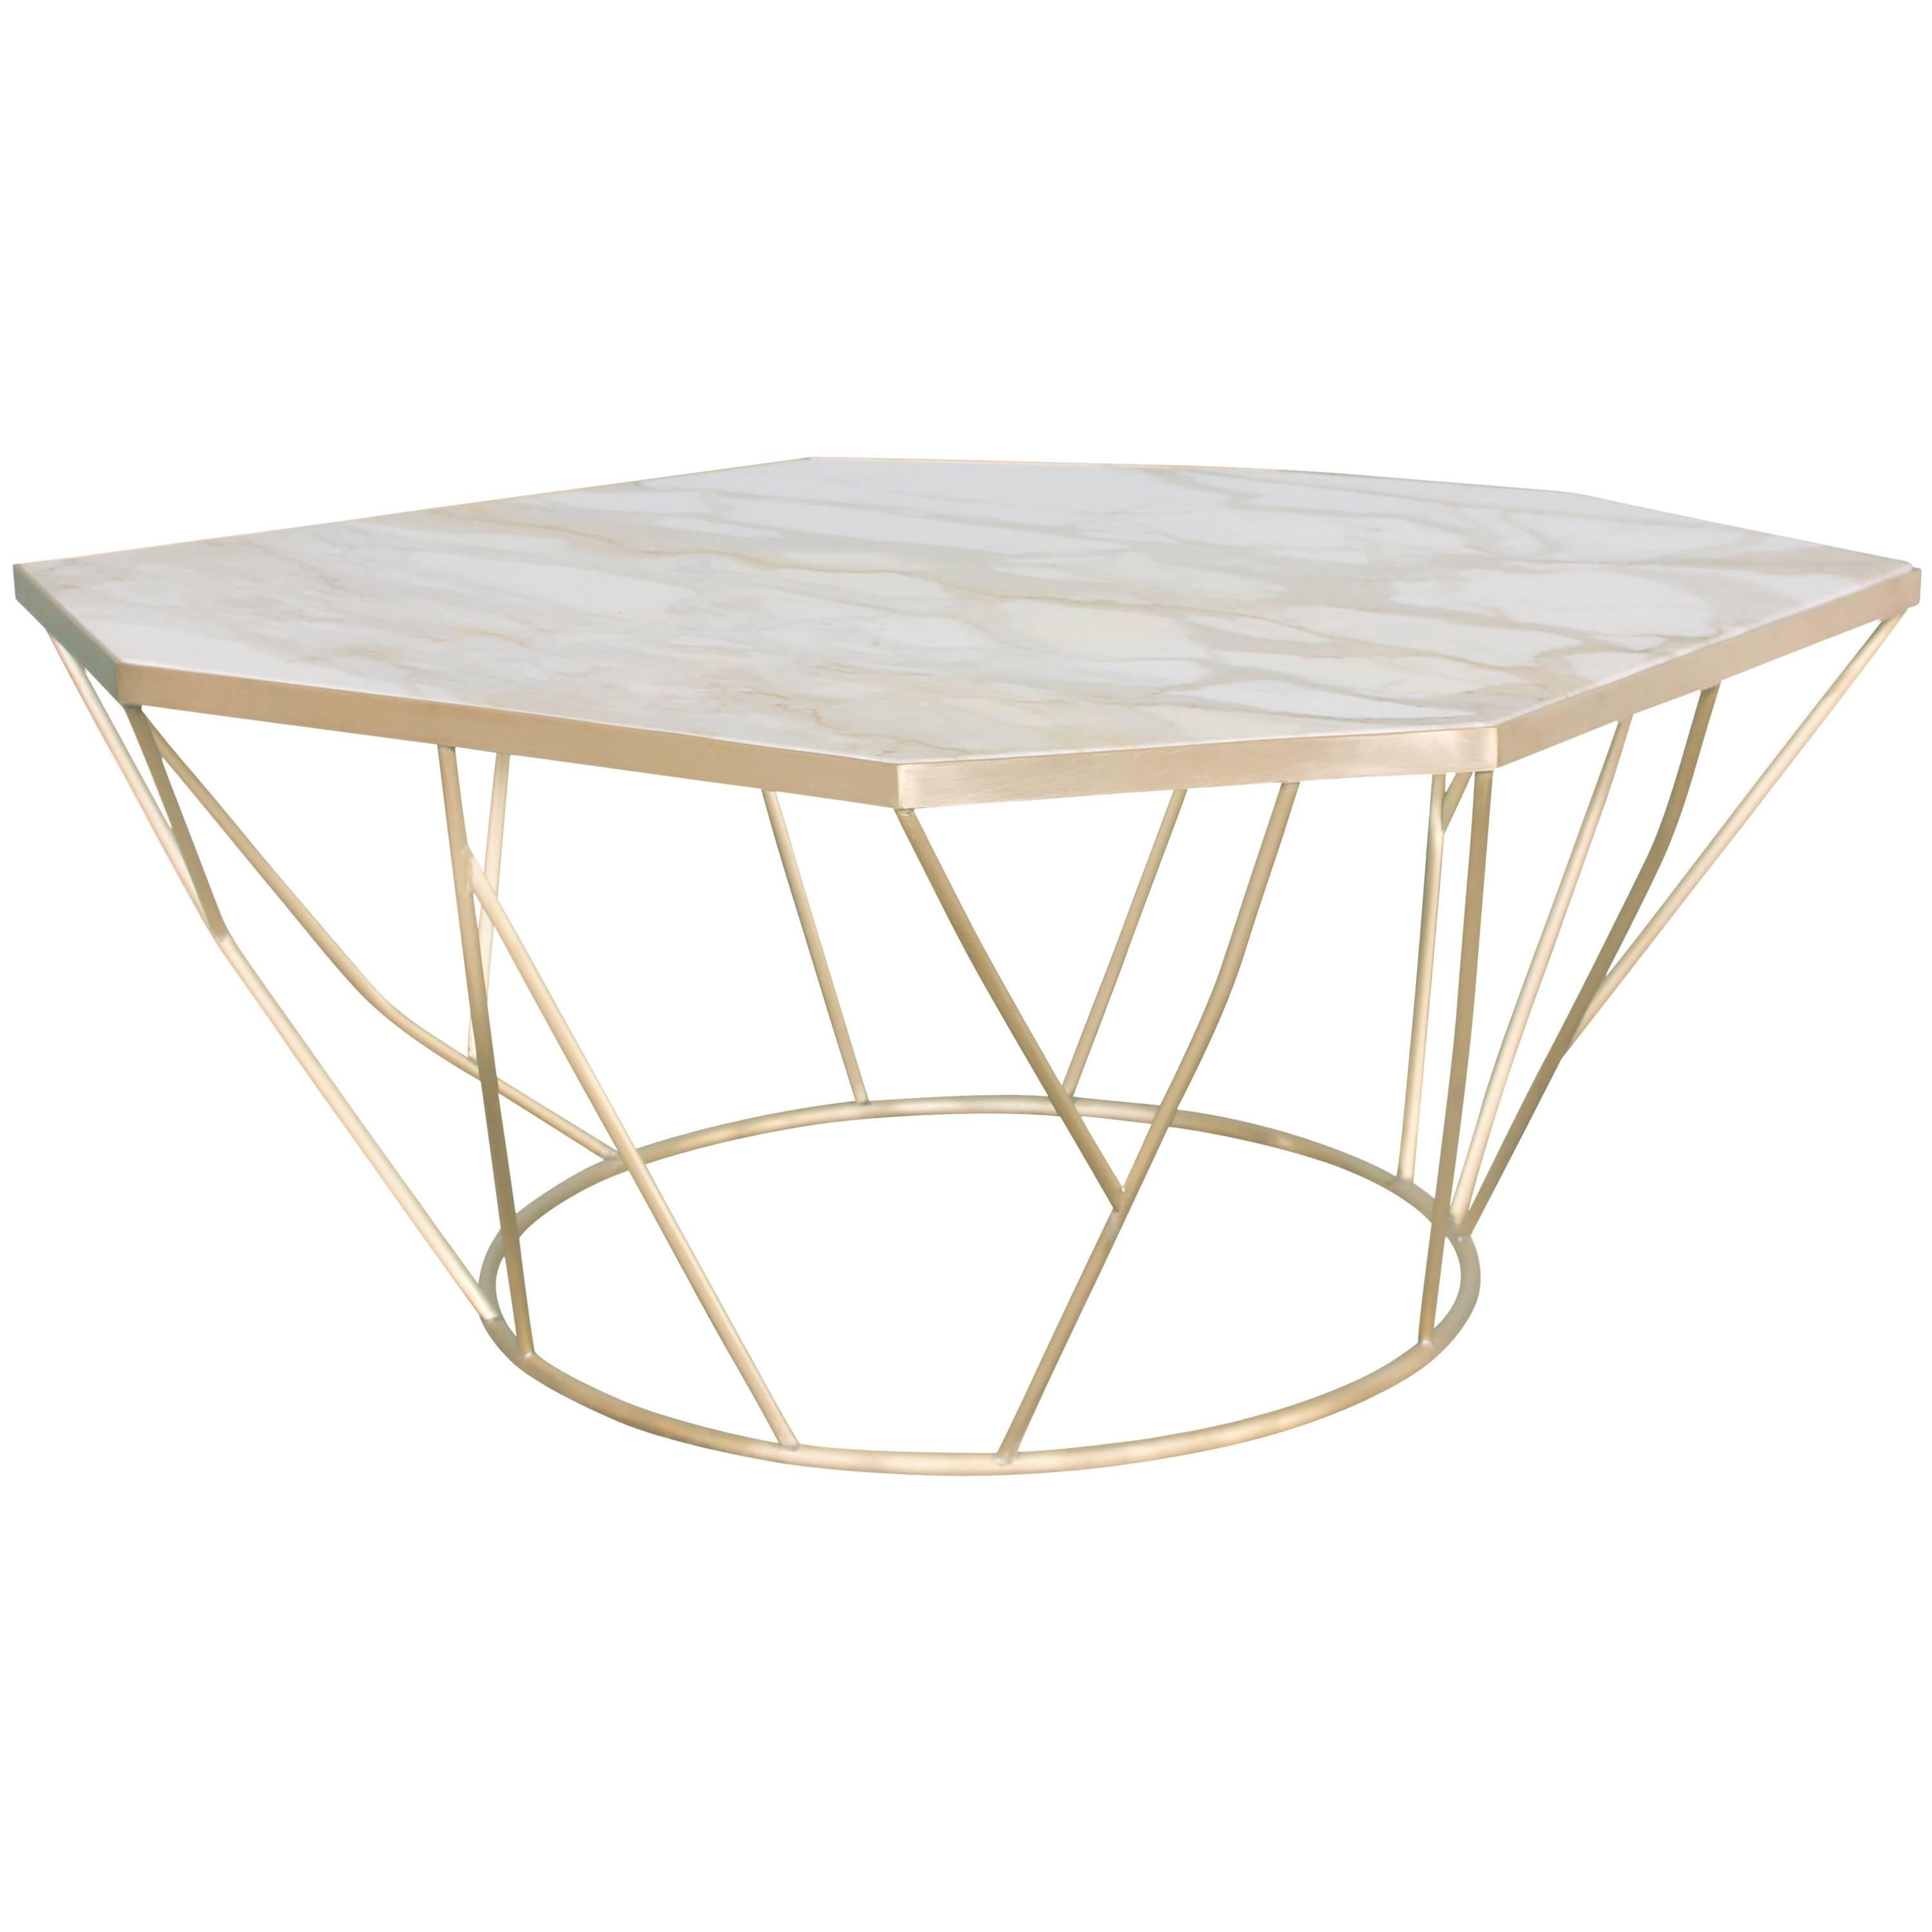 Facet Sculptural Cocktail Table in Satin Bronze with Inset Honed Marble Top. For Sale